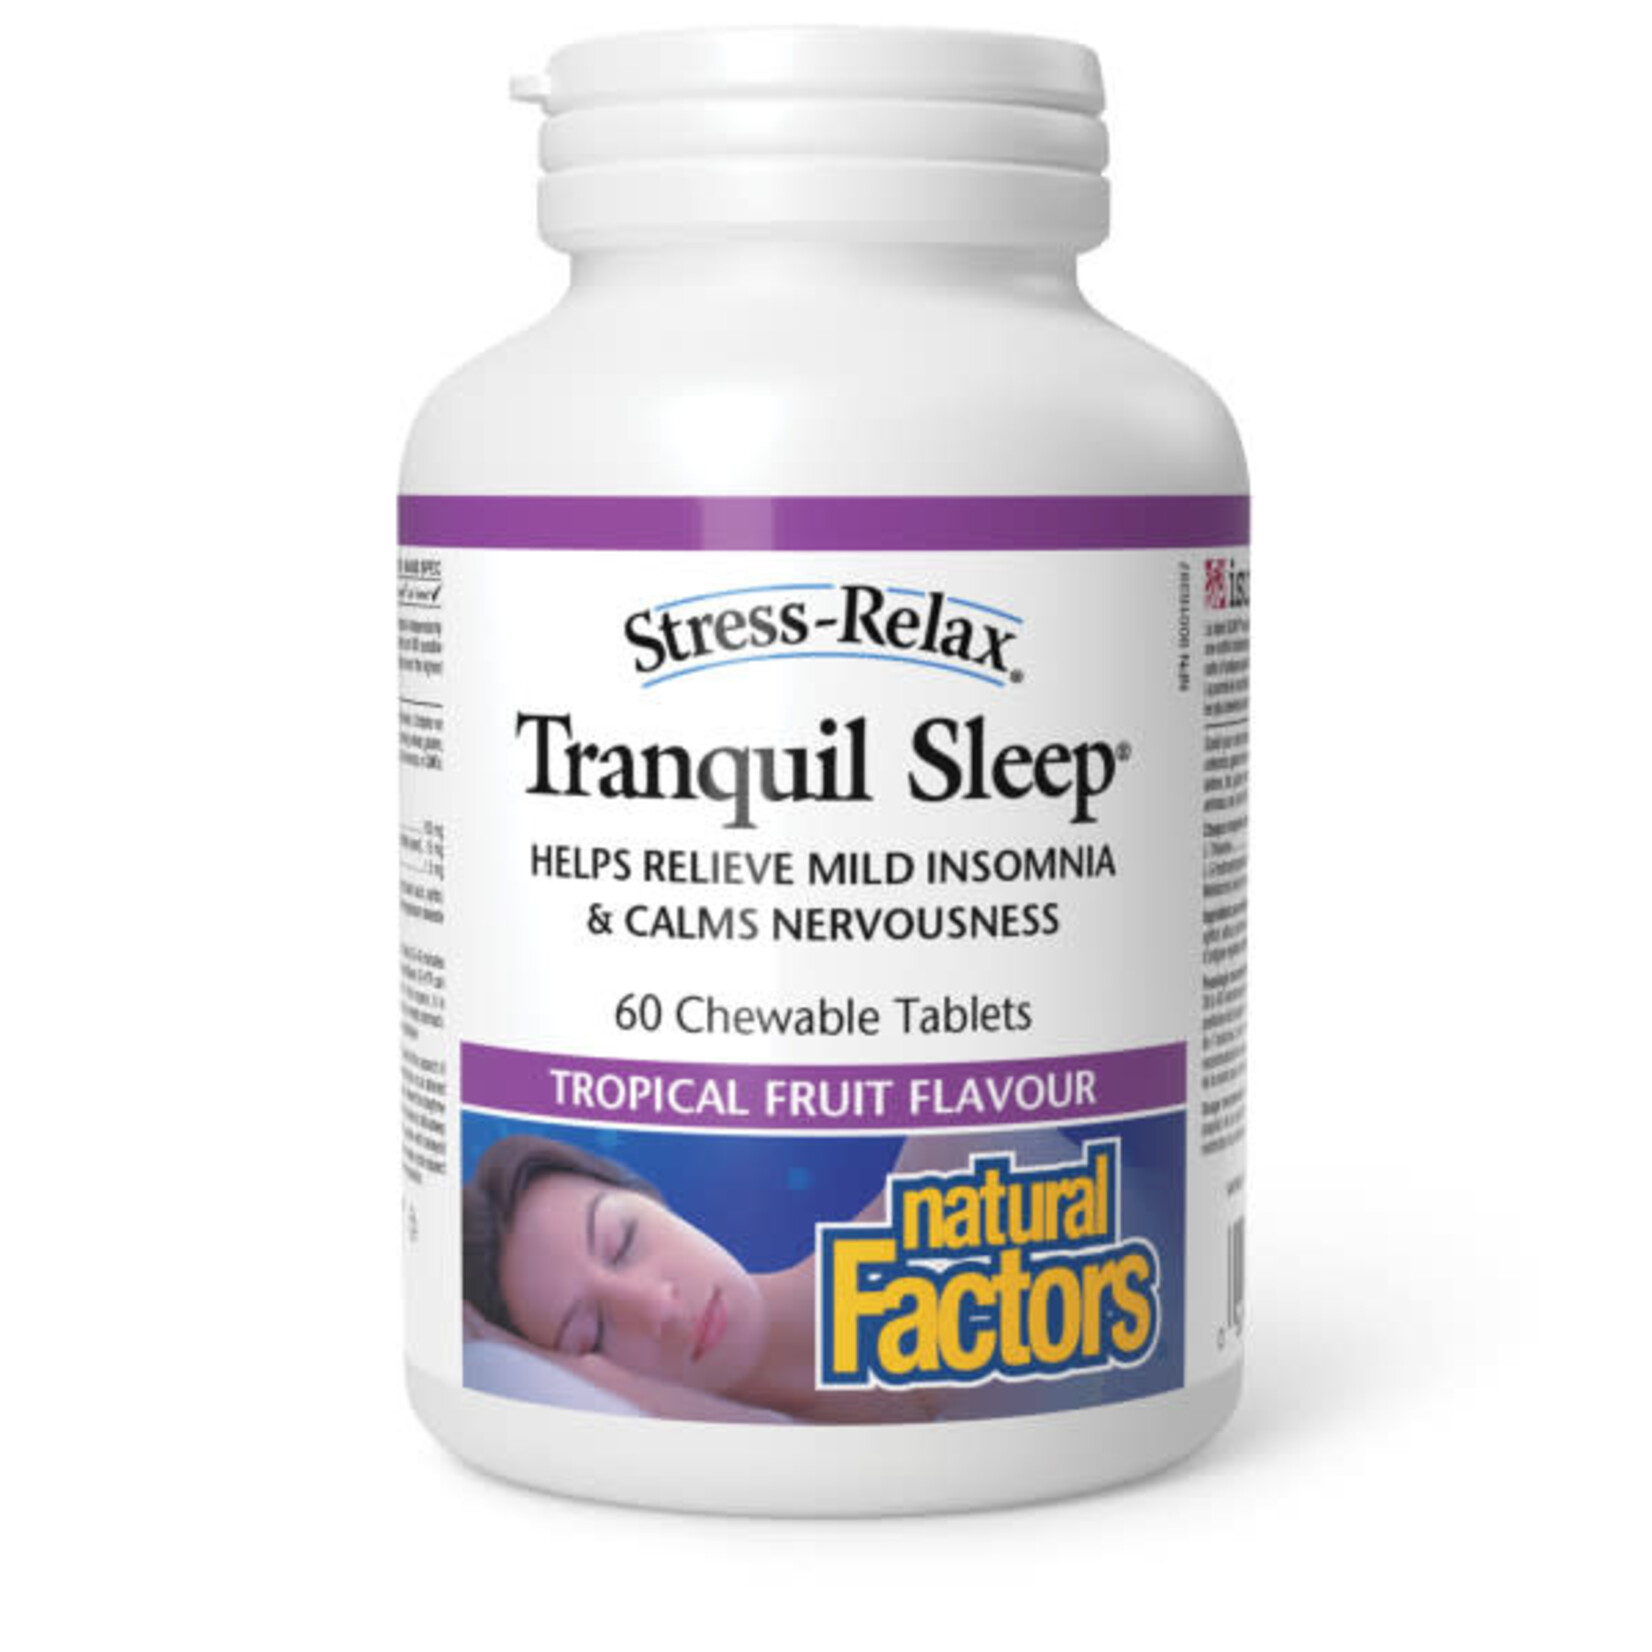 NATURAL FACTORS NATURAL FACTORS STRESS RELAX TRANQUIL SLEEP 60 CHEWABLE TABLETS